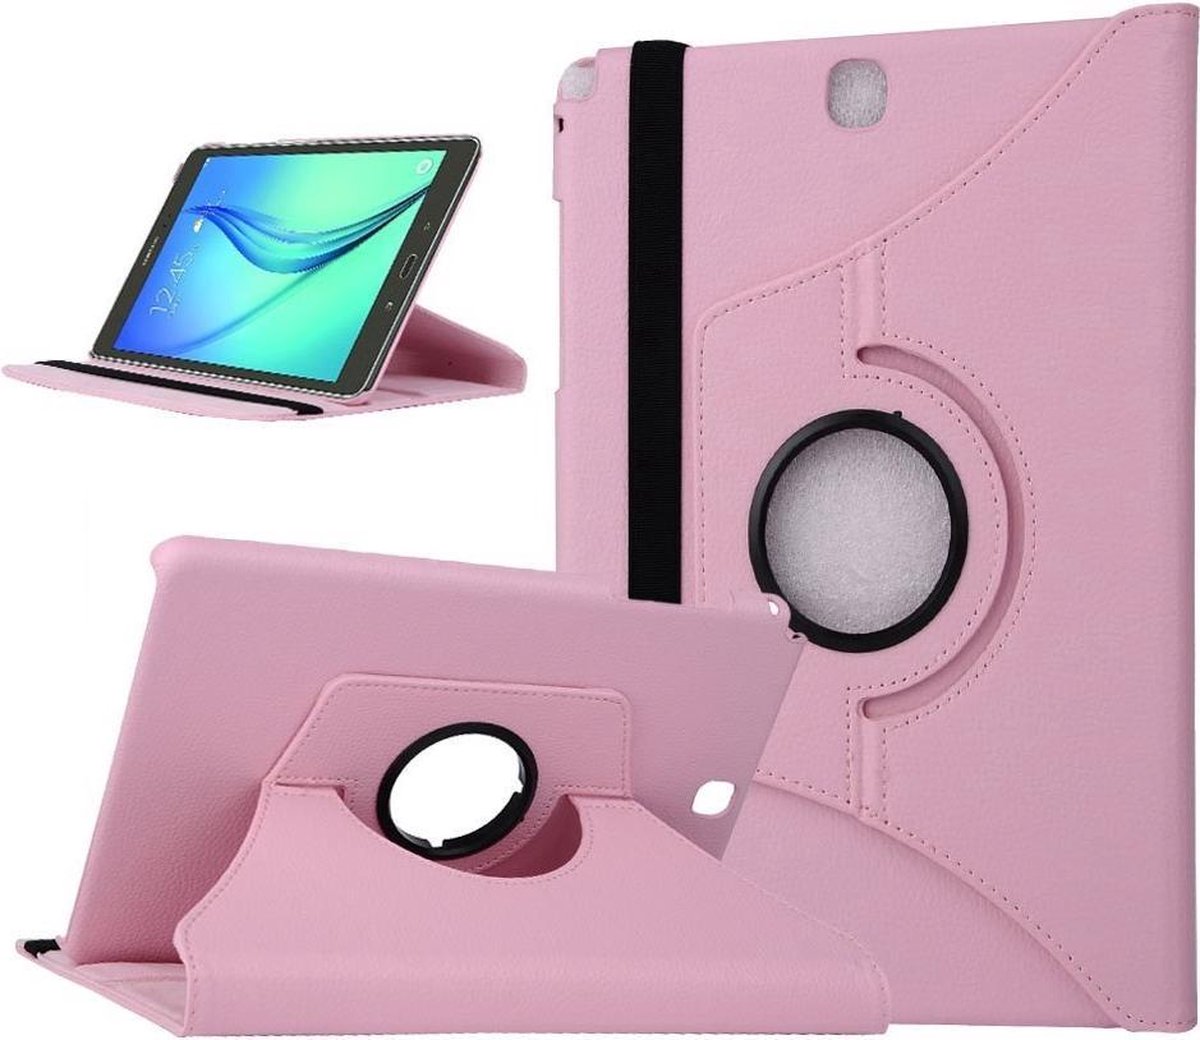 Xssive Tablet Hoes - Case - Cover 360° draaibaar voor Samsung Galaxy Tab A 9,7 inch T550 T555 P555 Soft Pink Licht Roze